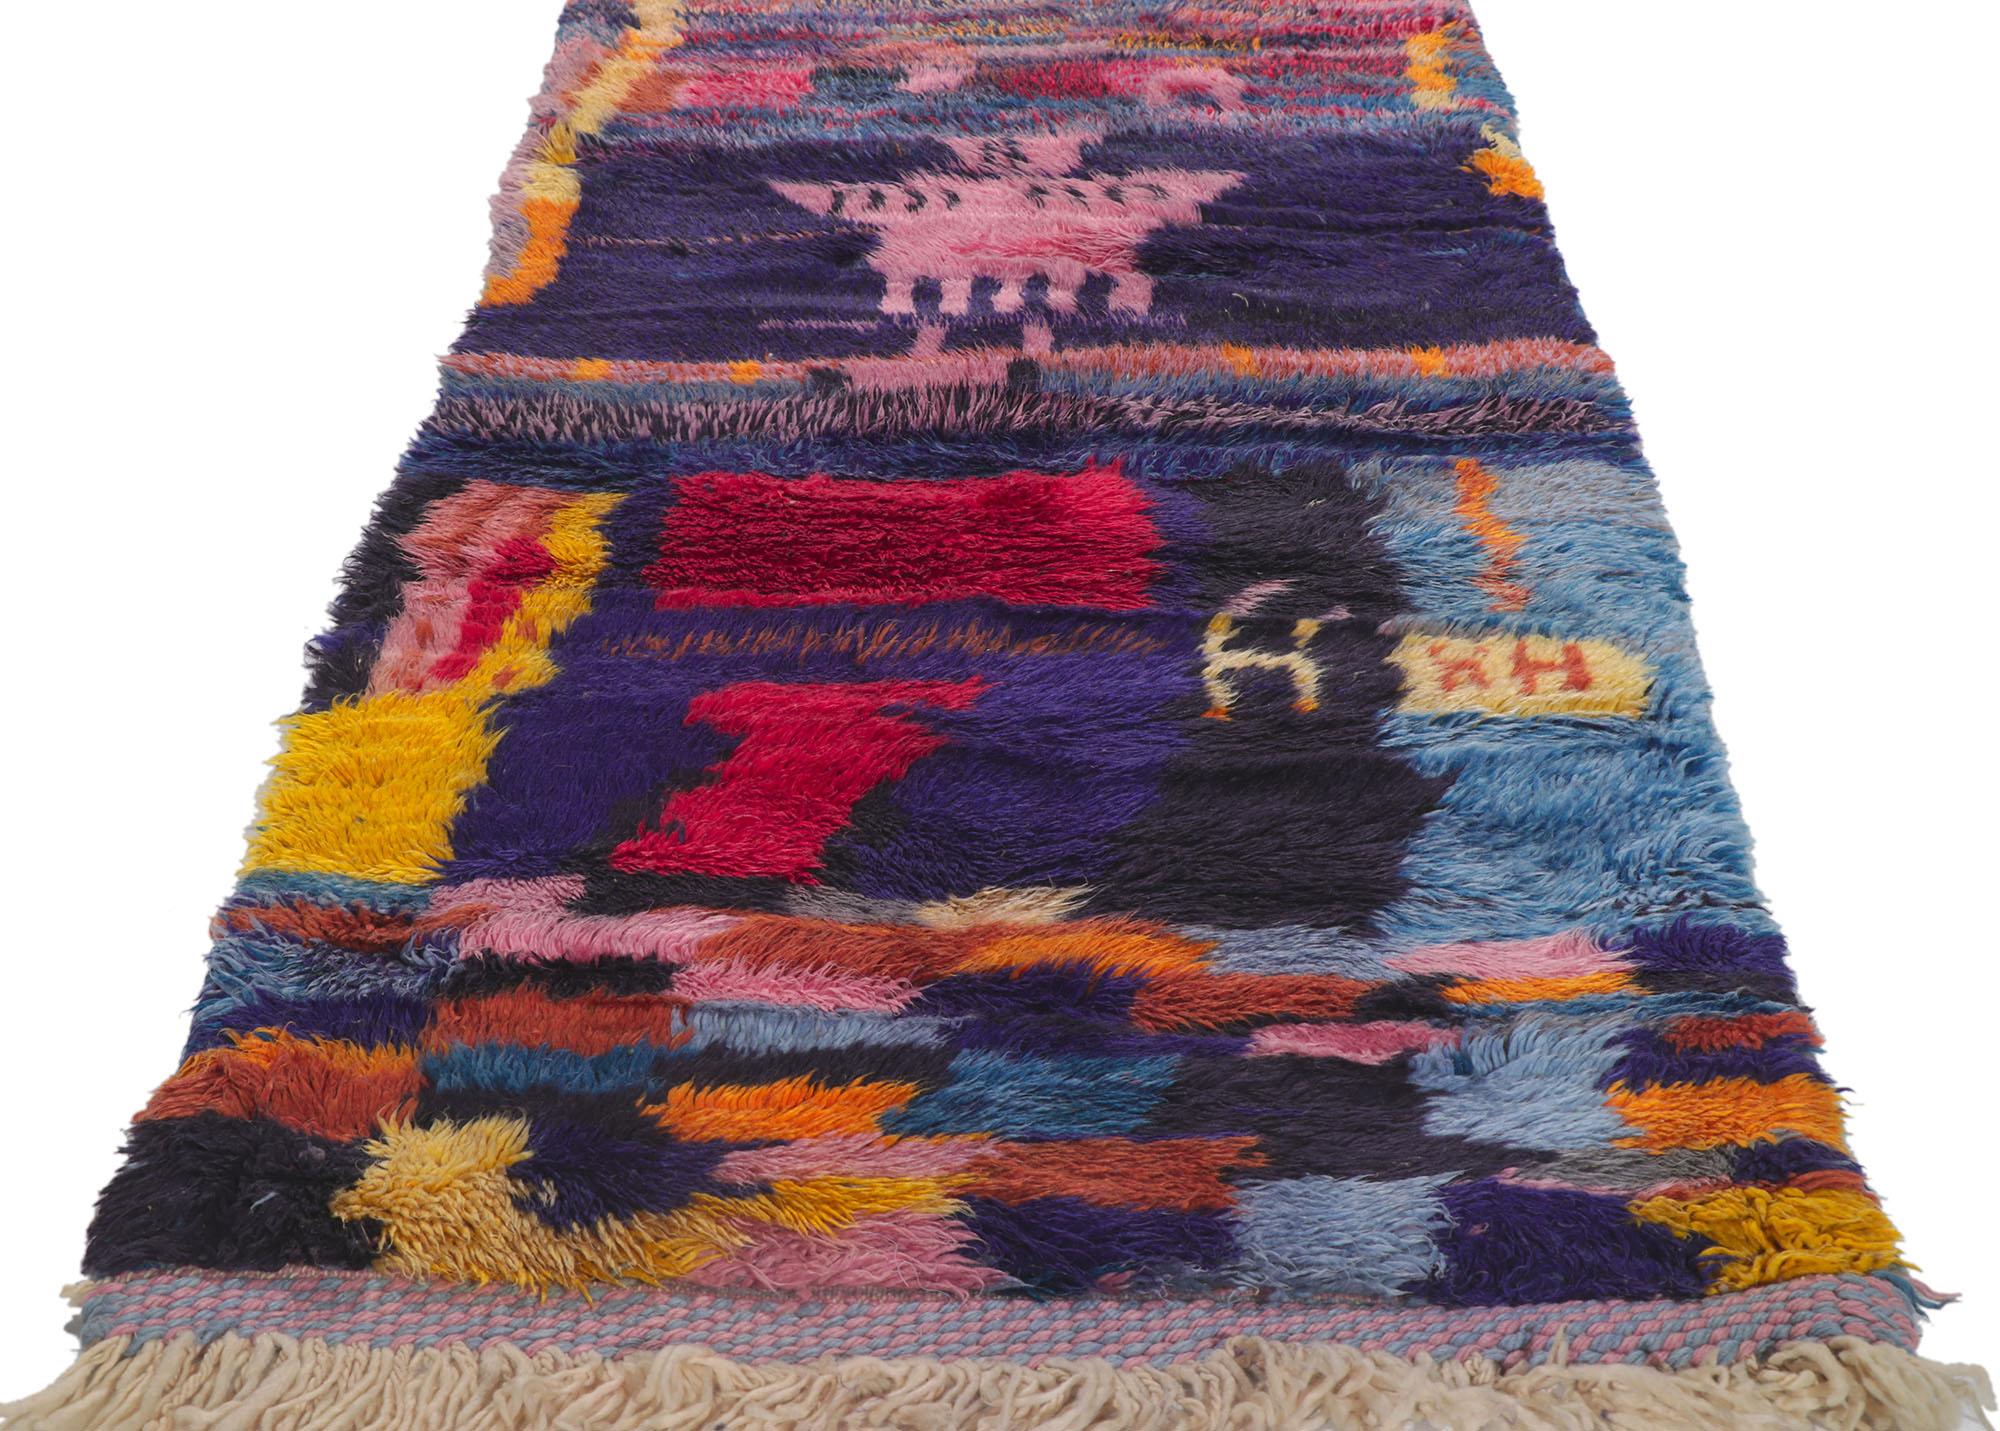 Hand-Knotted Contemporary Colorful Beni Ourain Moroccan Rug by Berber Tribes of Morocco For Sale